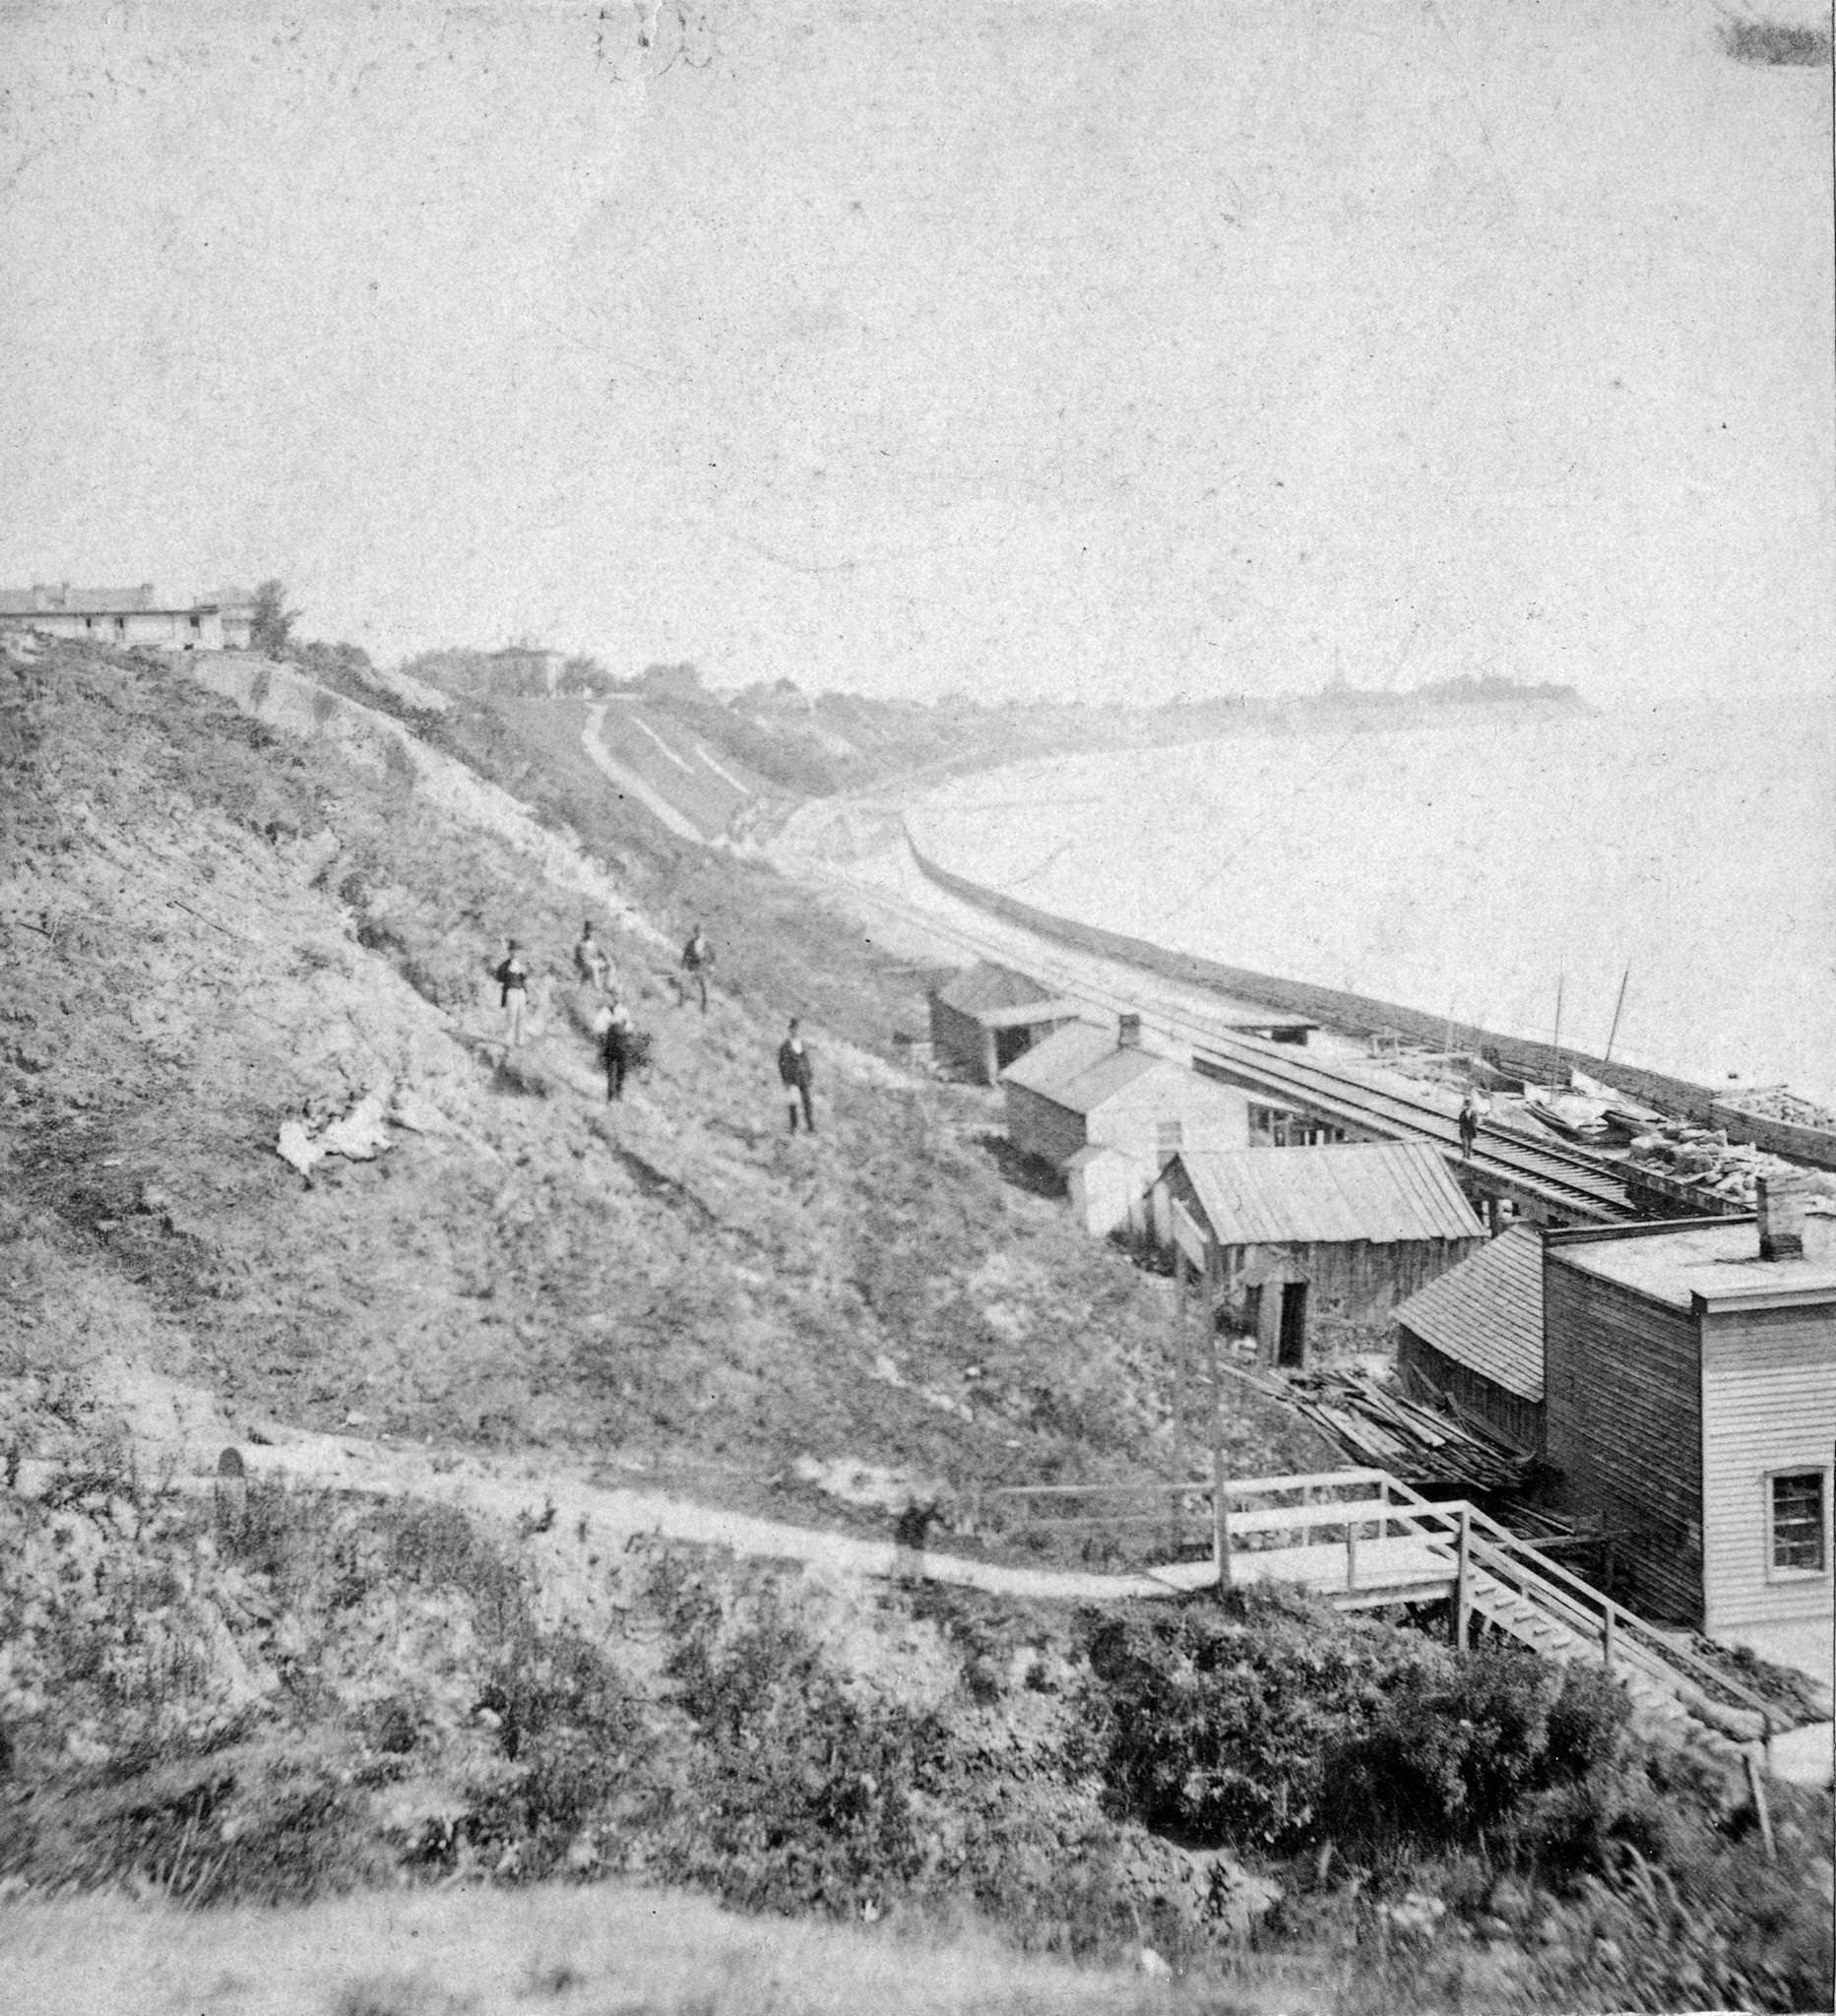 View of bluffs and buildings on the shore of Lake Michigan, Milwaukee, Wisconsin, 1877.